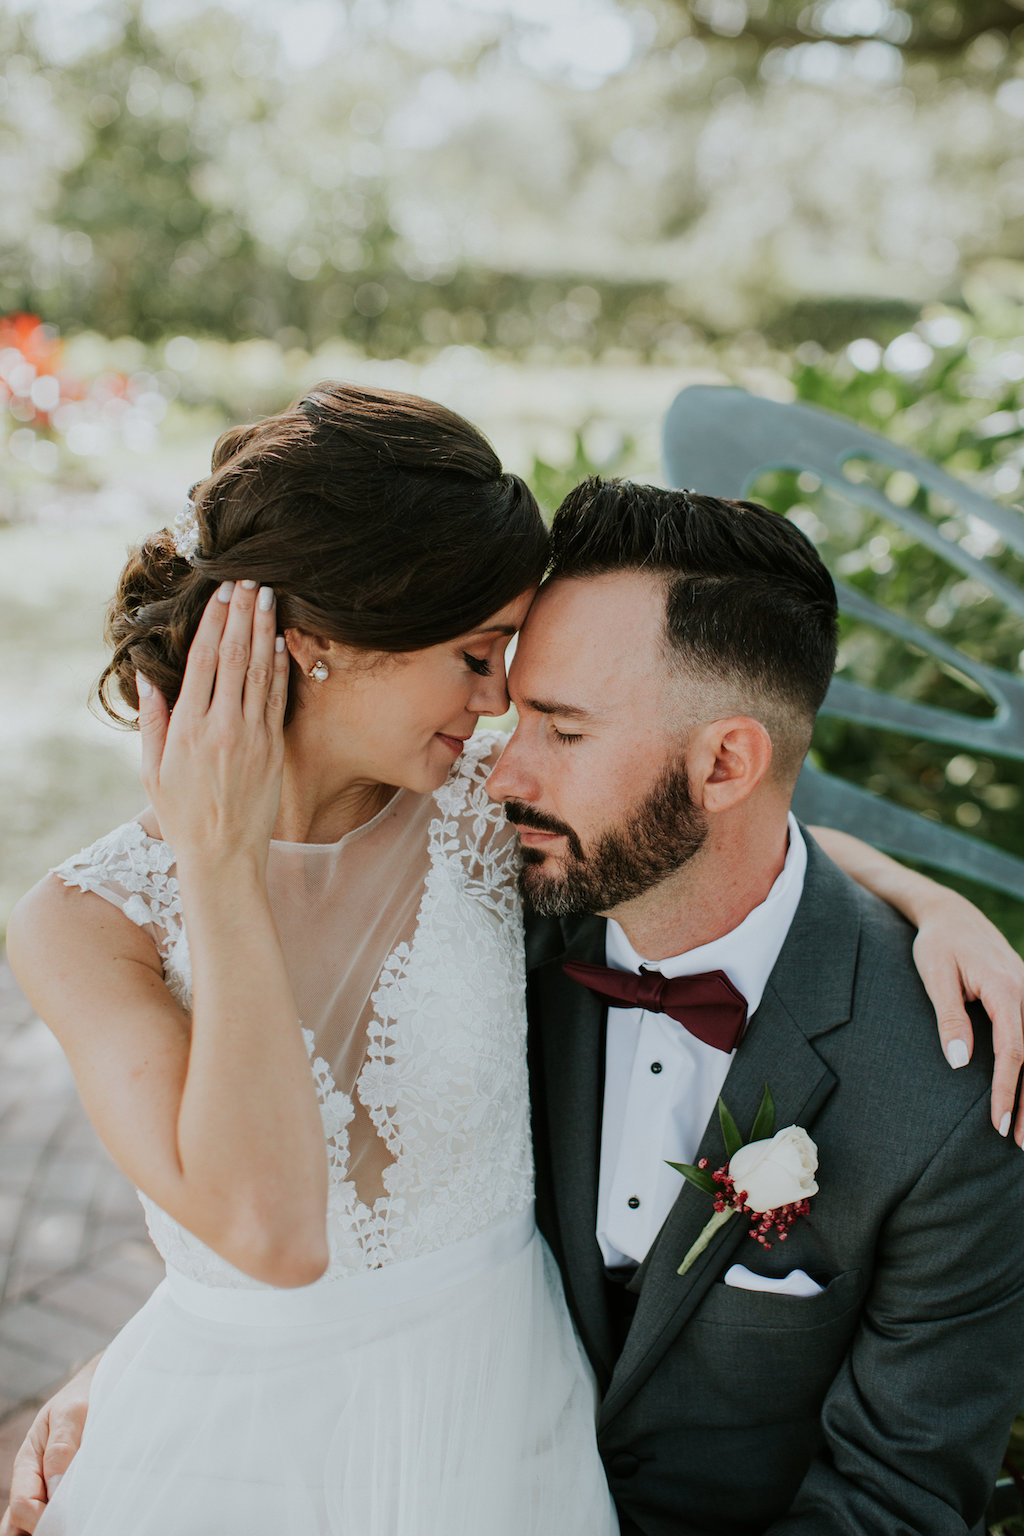 Bride and Groom First Look Portrait, Groom in Grey Tuxedo and Burgundy Bowtie with White Rose and Red Flower Boutonniere, Bride in Boho Chic V-Neck Lace Illusion White Wtoo Wedding Dress | Tampa Bay Wedding Venue Davis Islands Garden Club